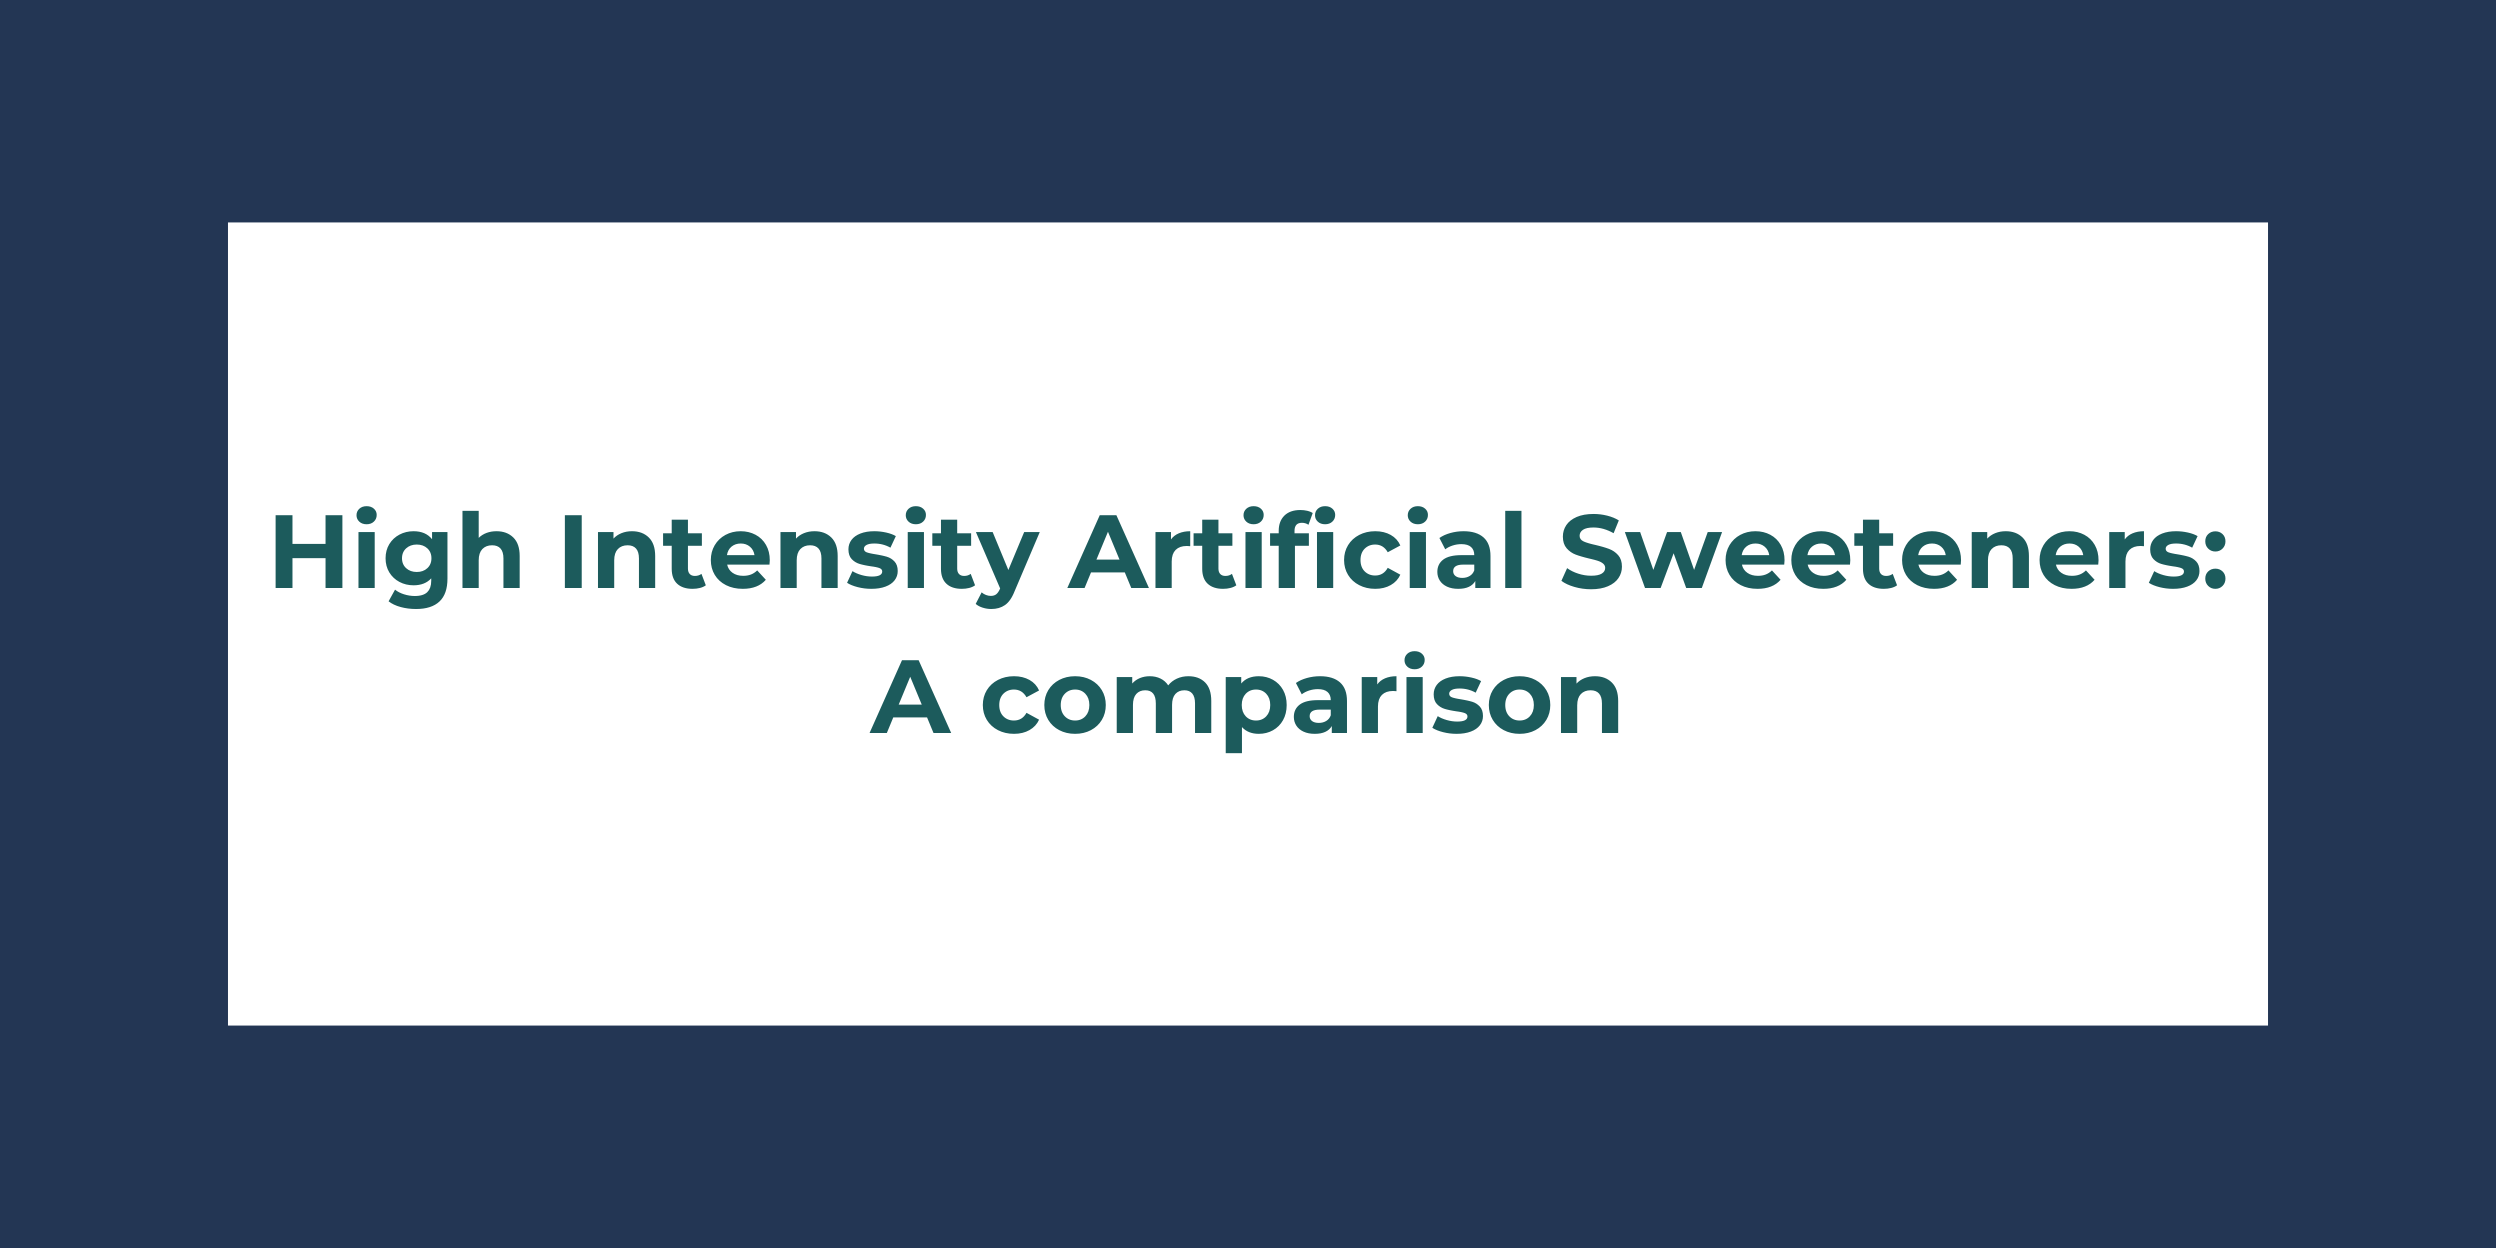 High Intensity Artificial Sweeteners: A comparison